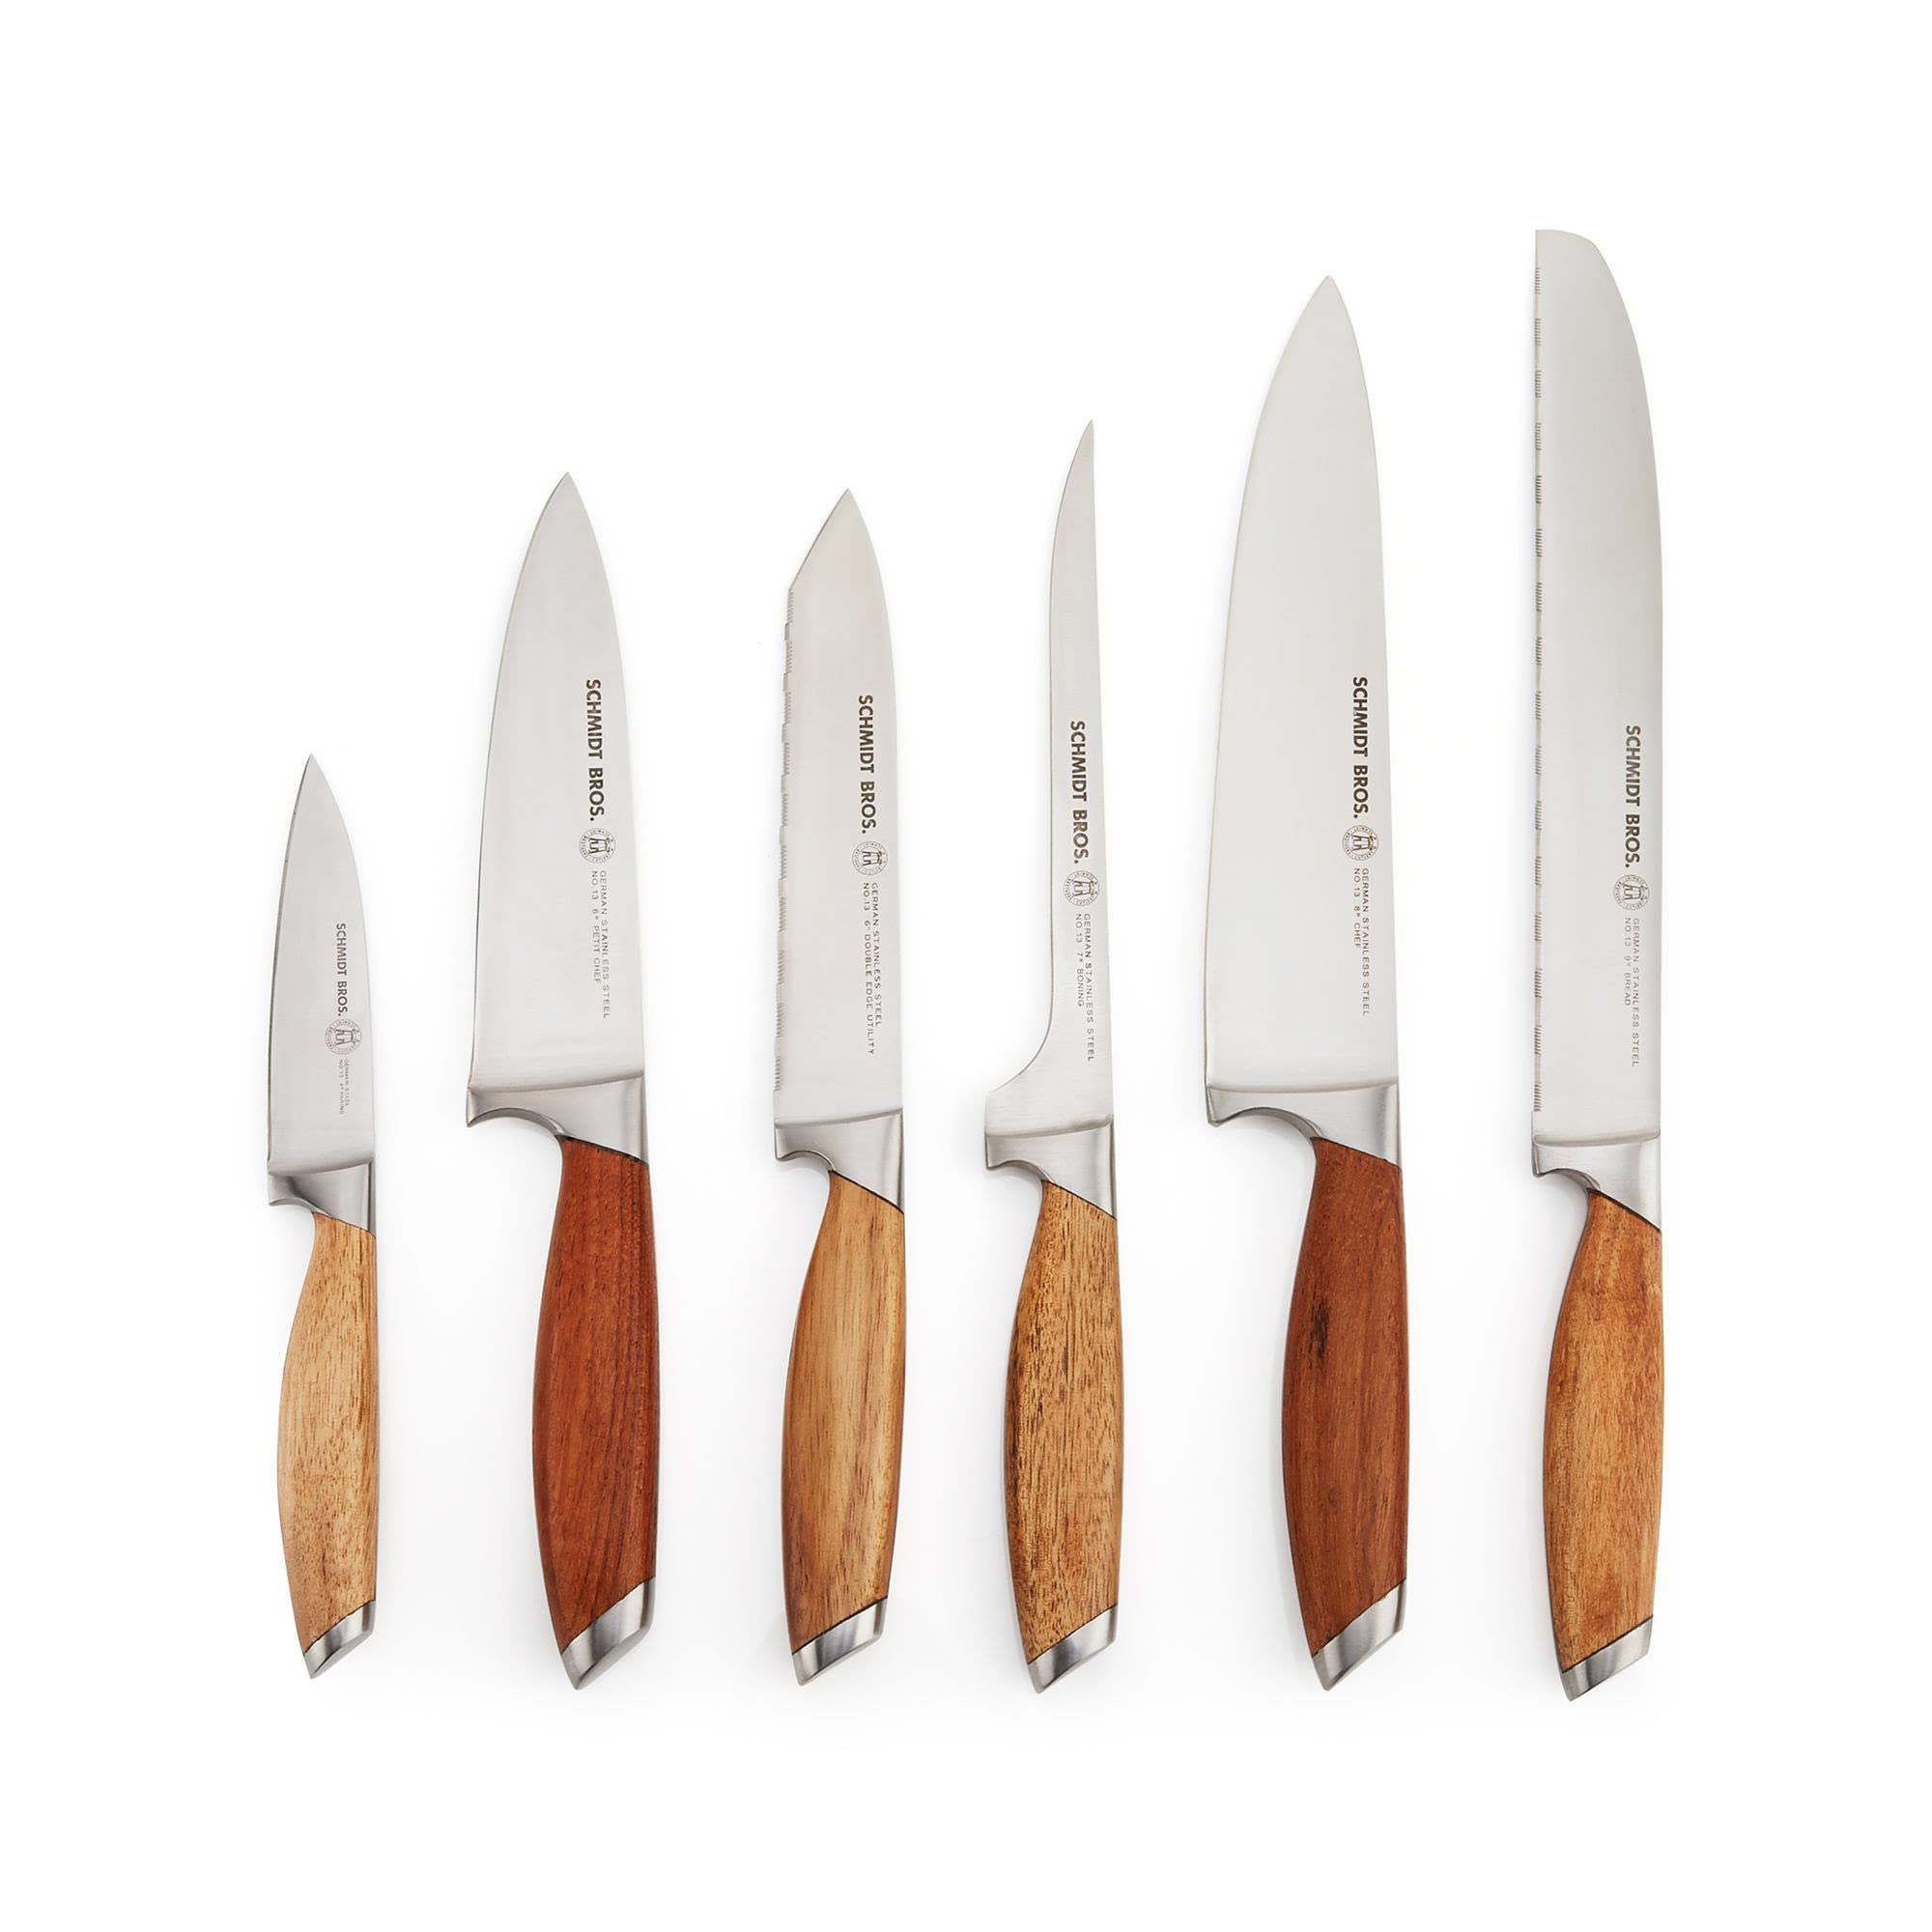 Schmidt Brothers - Bonded Teak, 7-Piece Knife Set, High-Carbon Stainless Steel Cutlery with Midtown Acacia and Acrylic Magnetic Knife Block